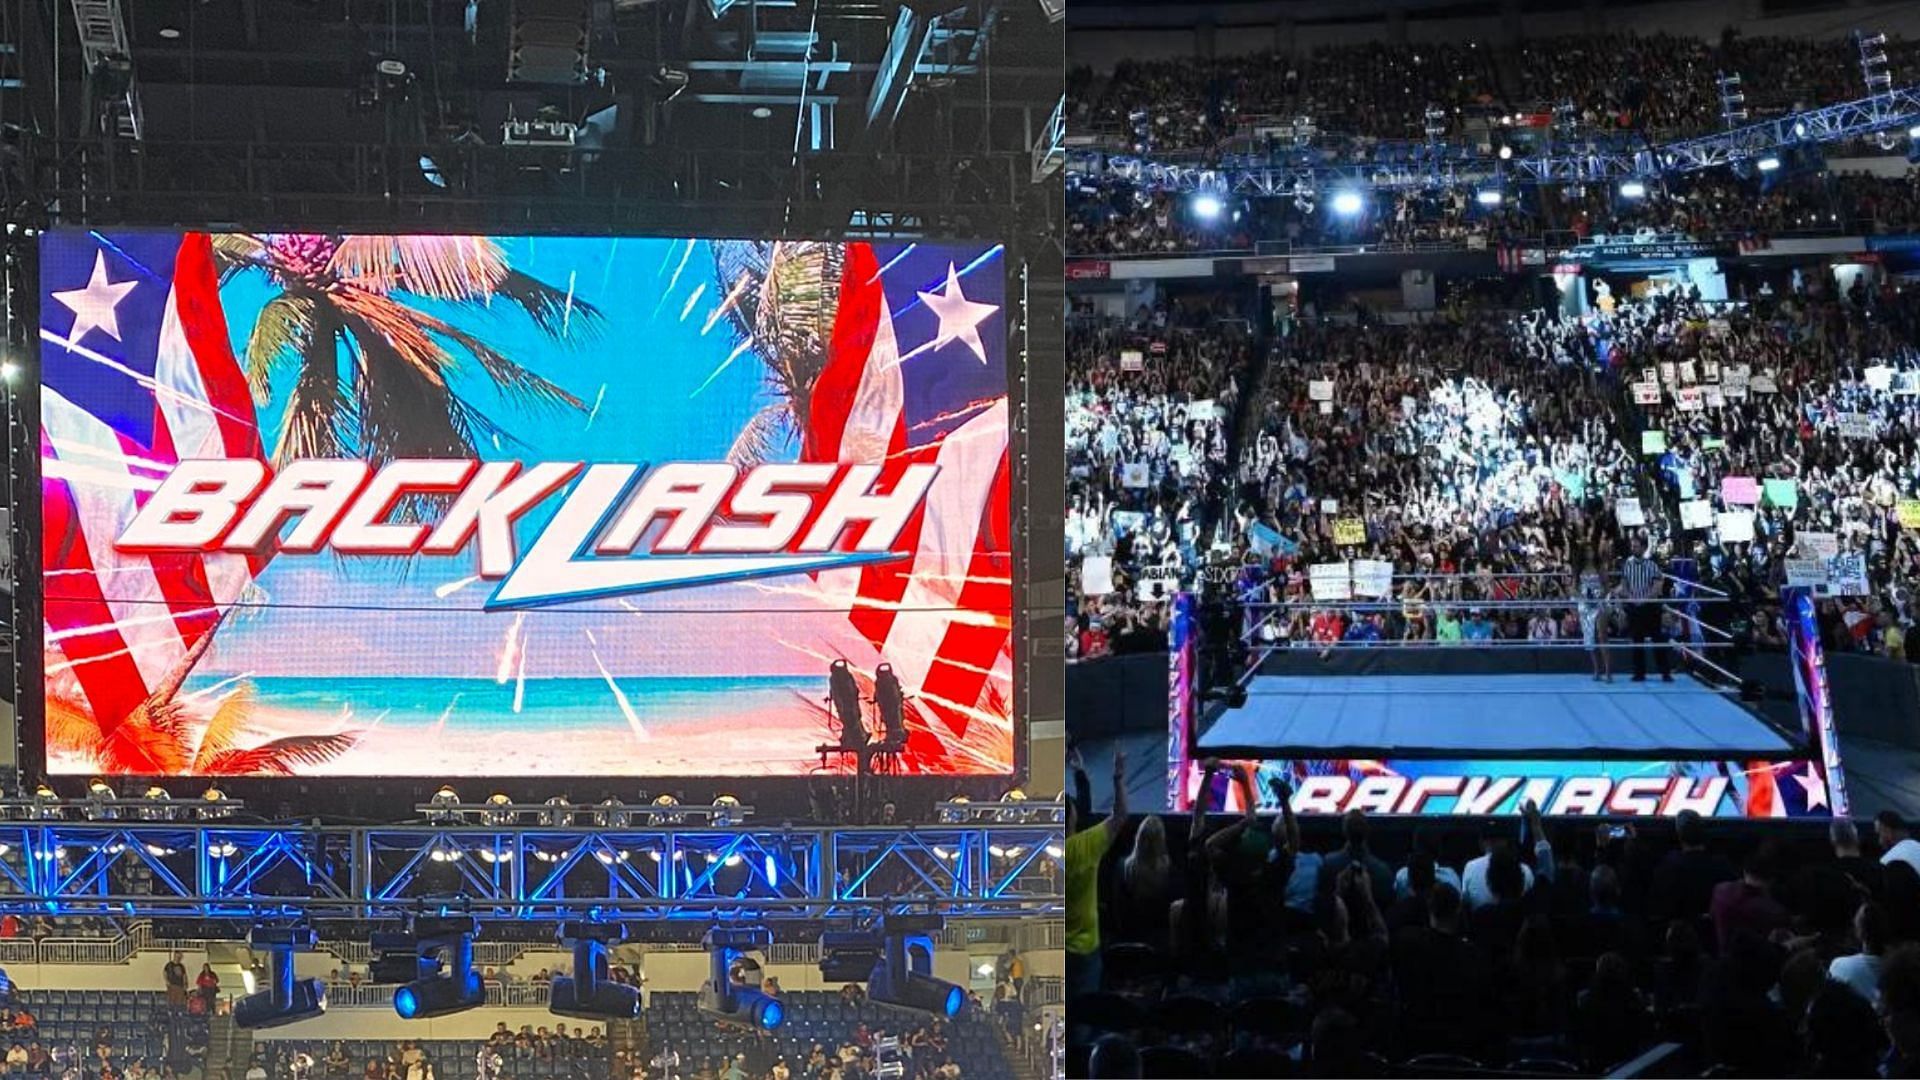 WWE Backlash aired this past Saturday night.